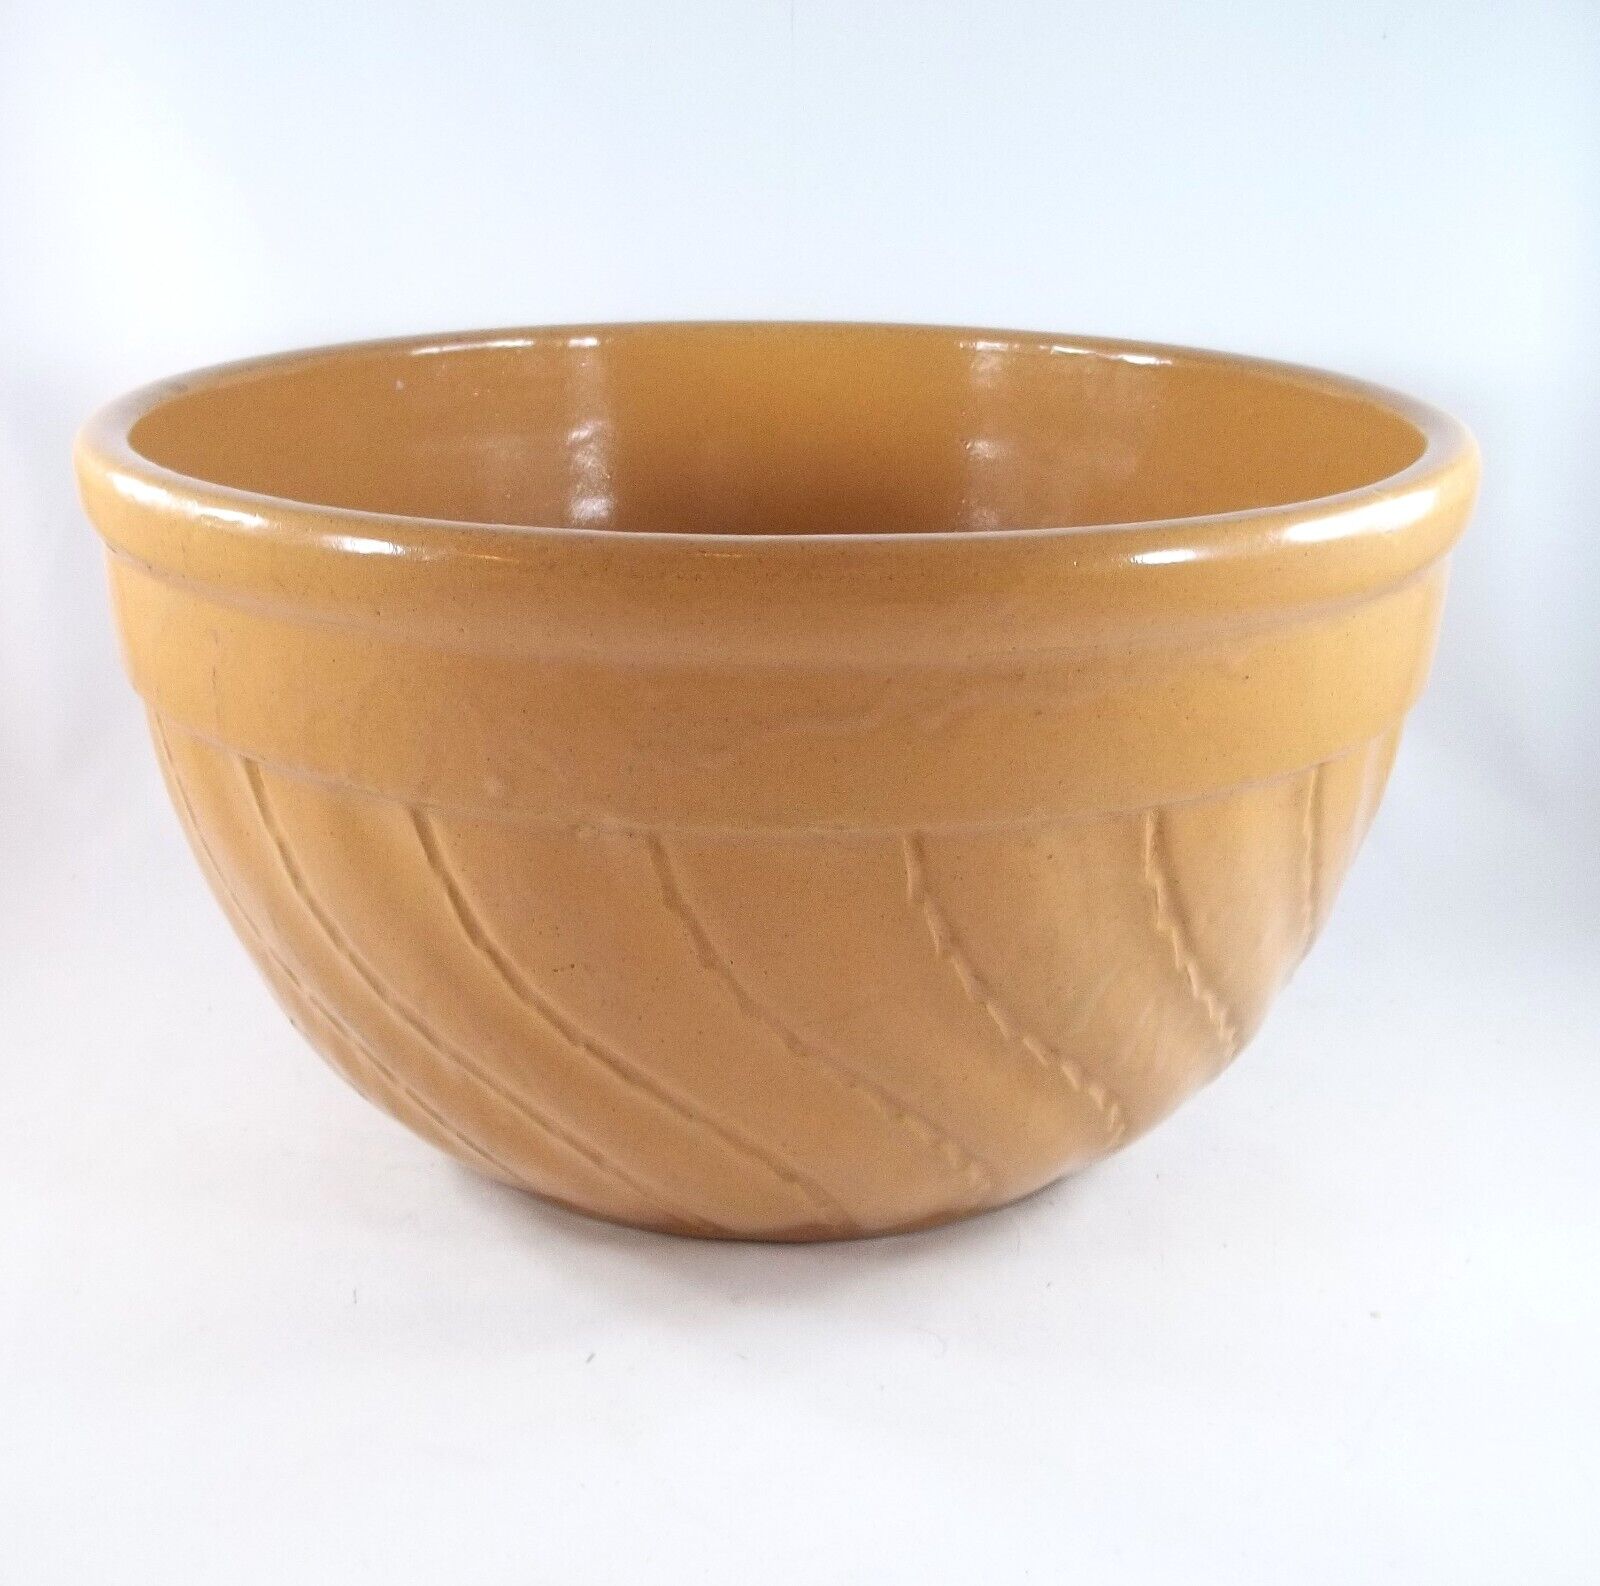 Sturdy Big Yellow Ware Mixing Bowl With Intaglio Decoration, Country Farmhouse